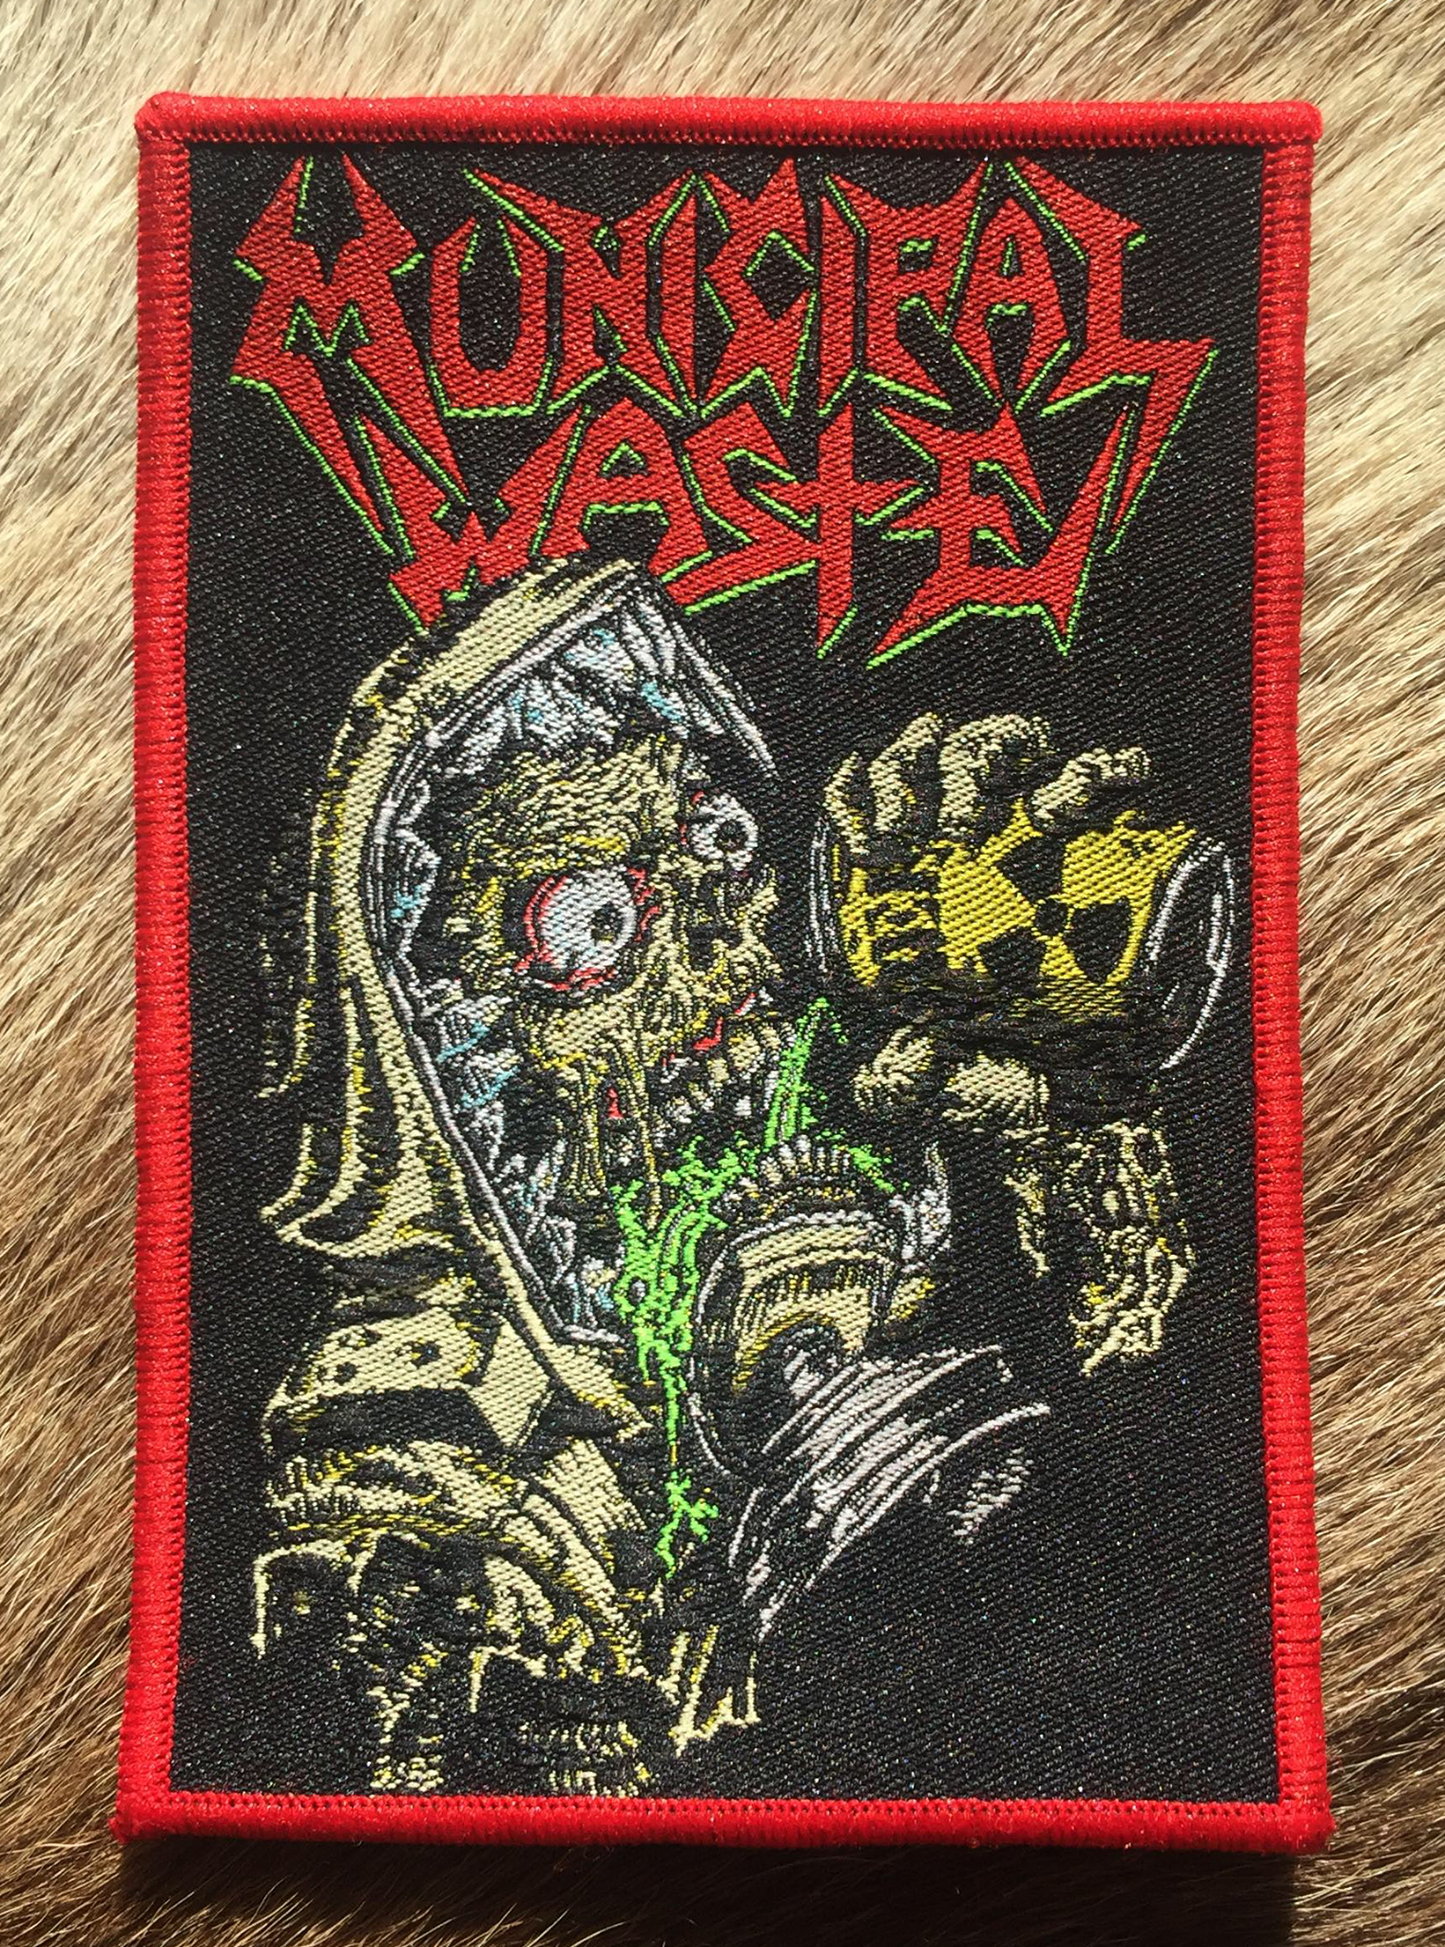 Municipal Waste - The Last Rager Red Border Patch